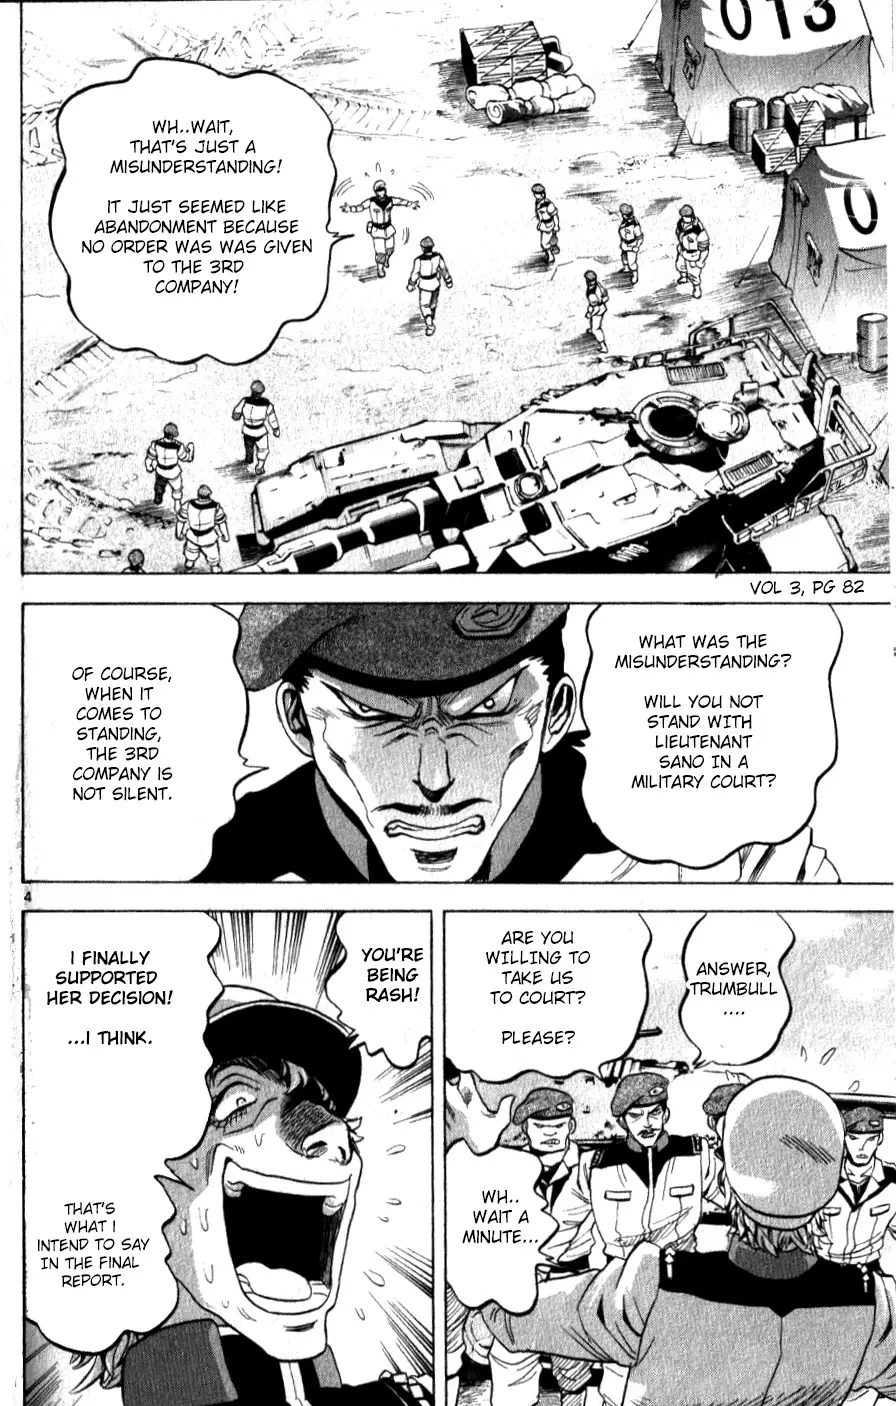 Mobile Suit Gundam Aggressor - 12 page 3-5a3f03ab